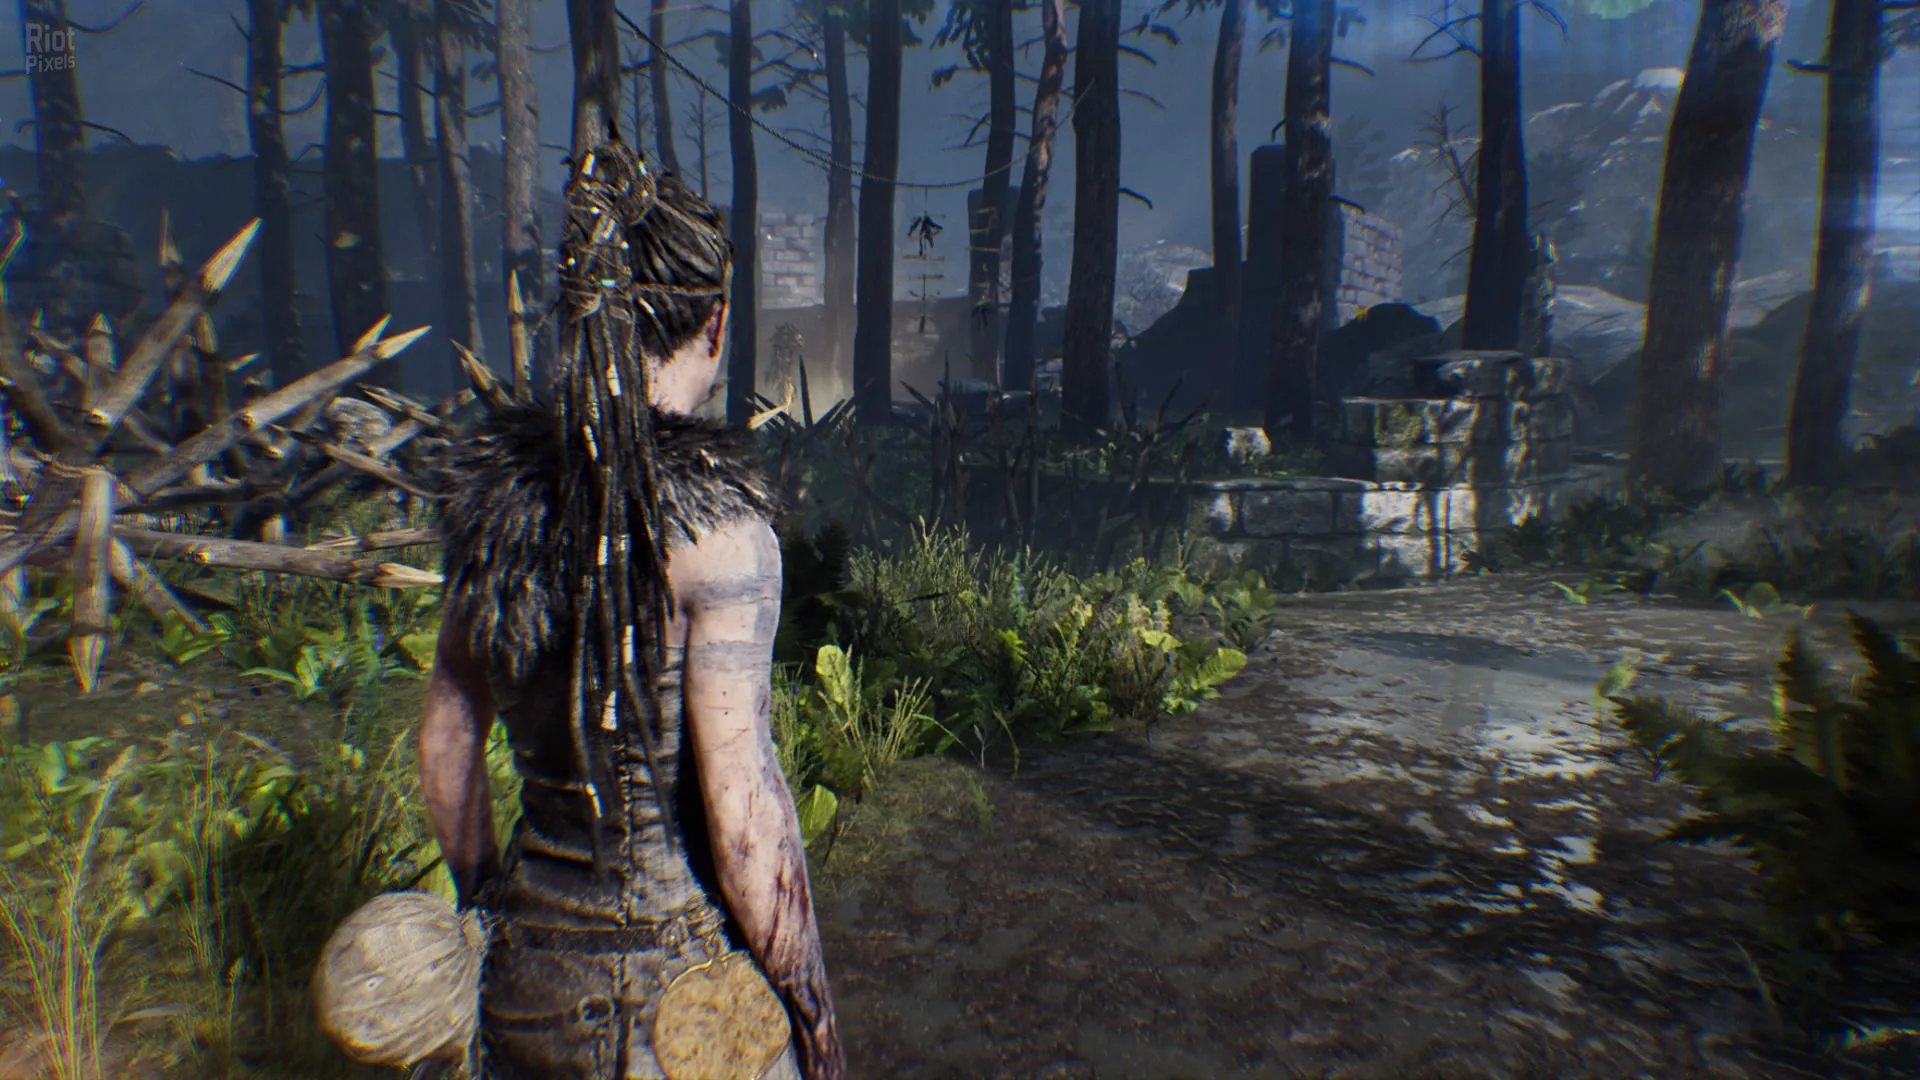 download senua hellblade for free